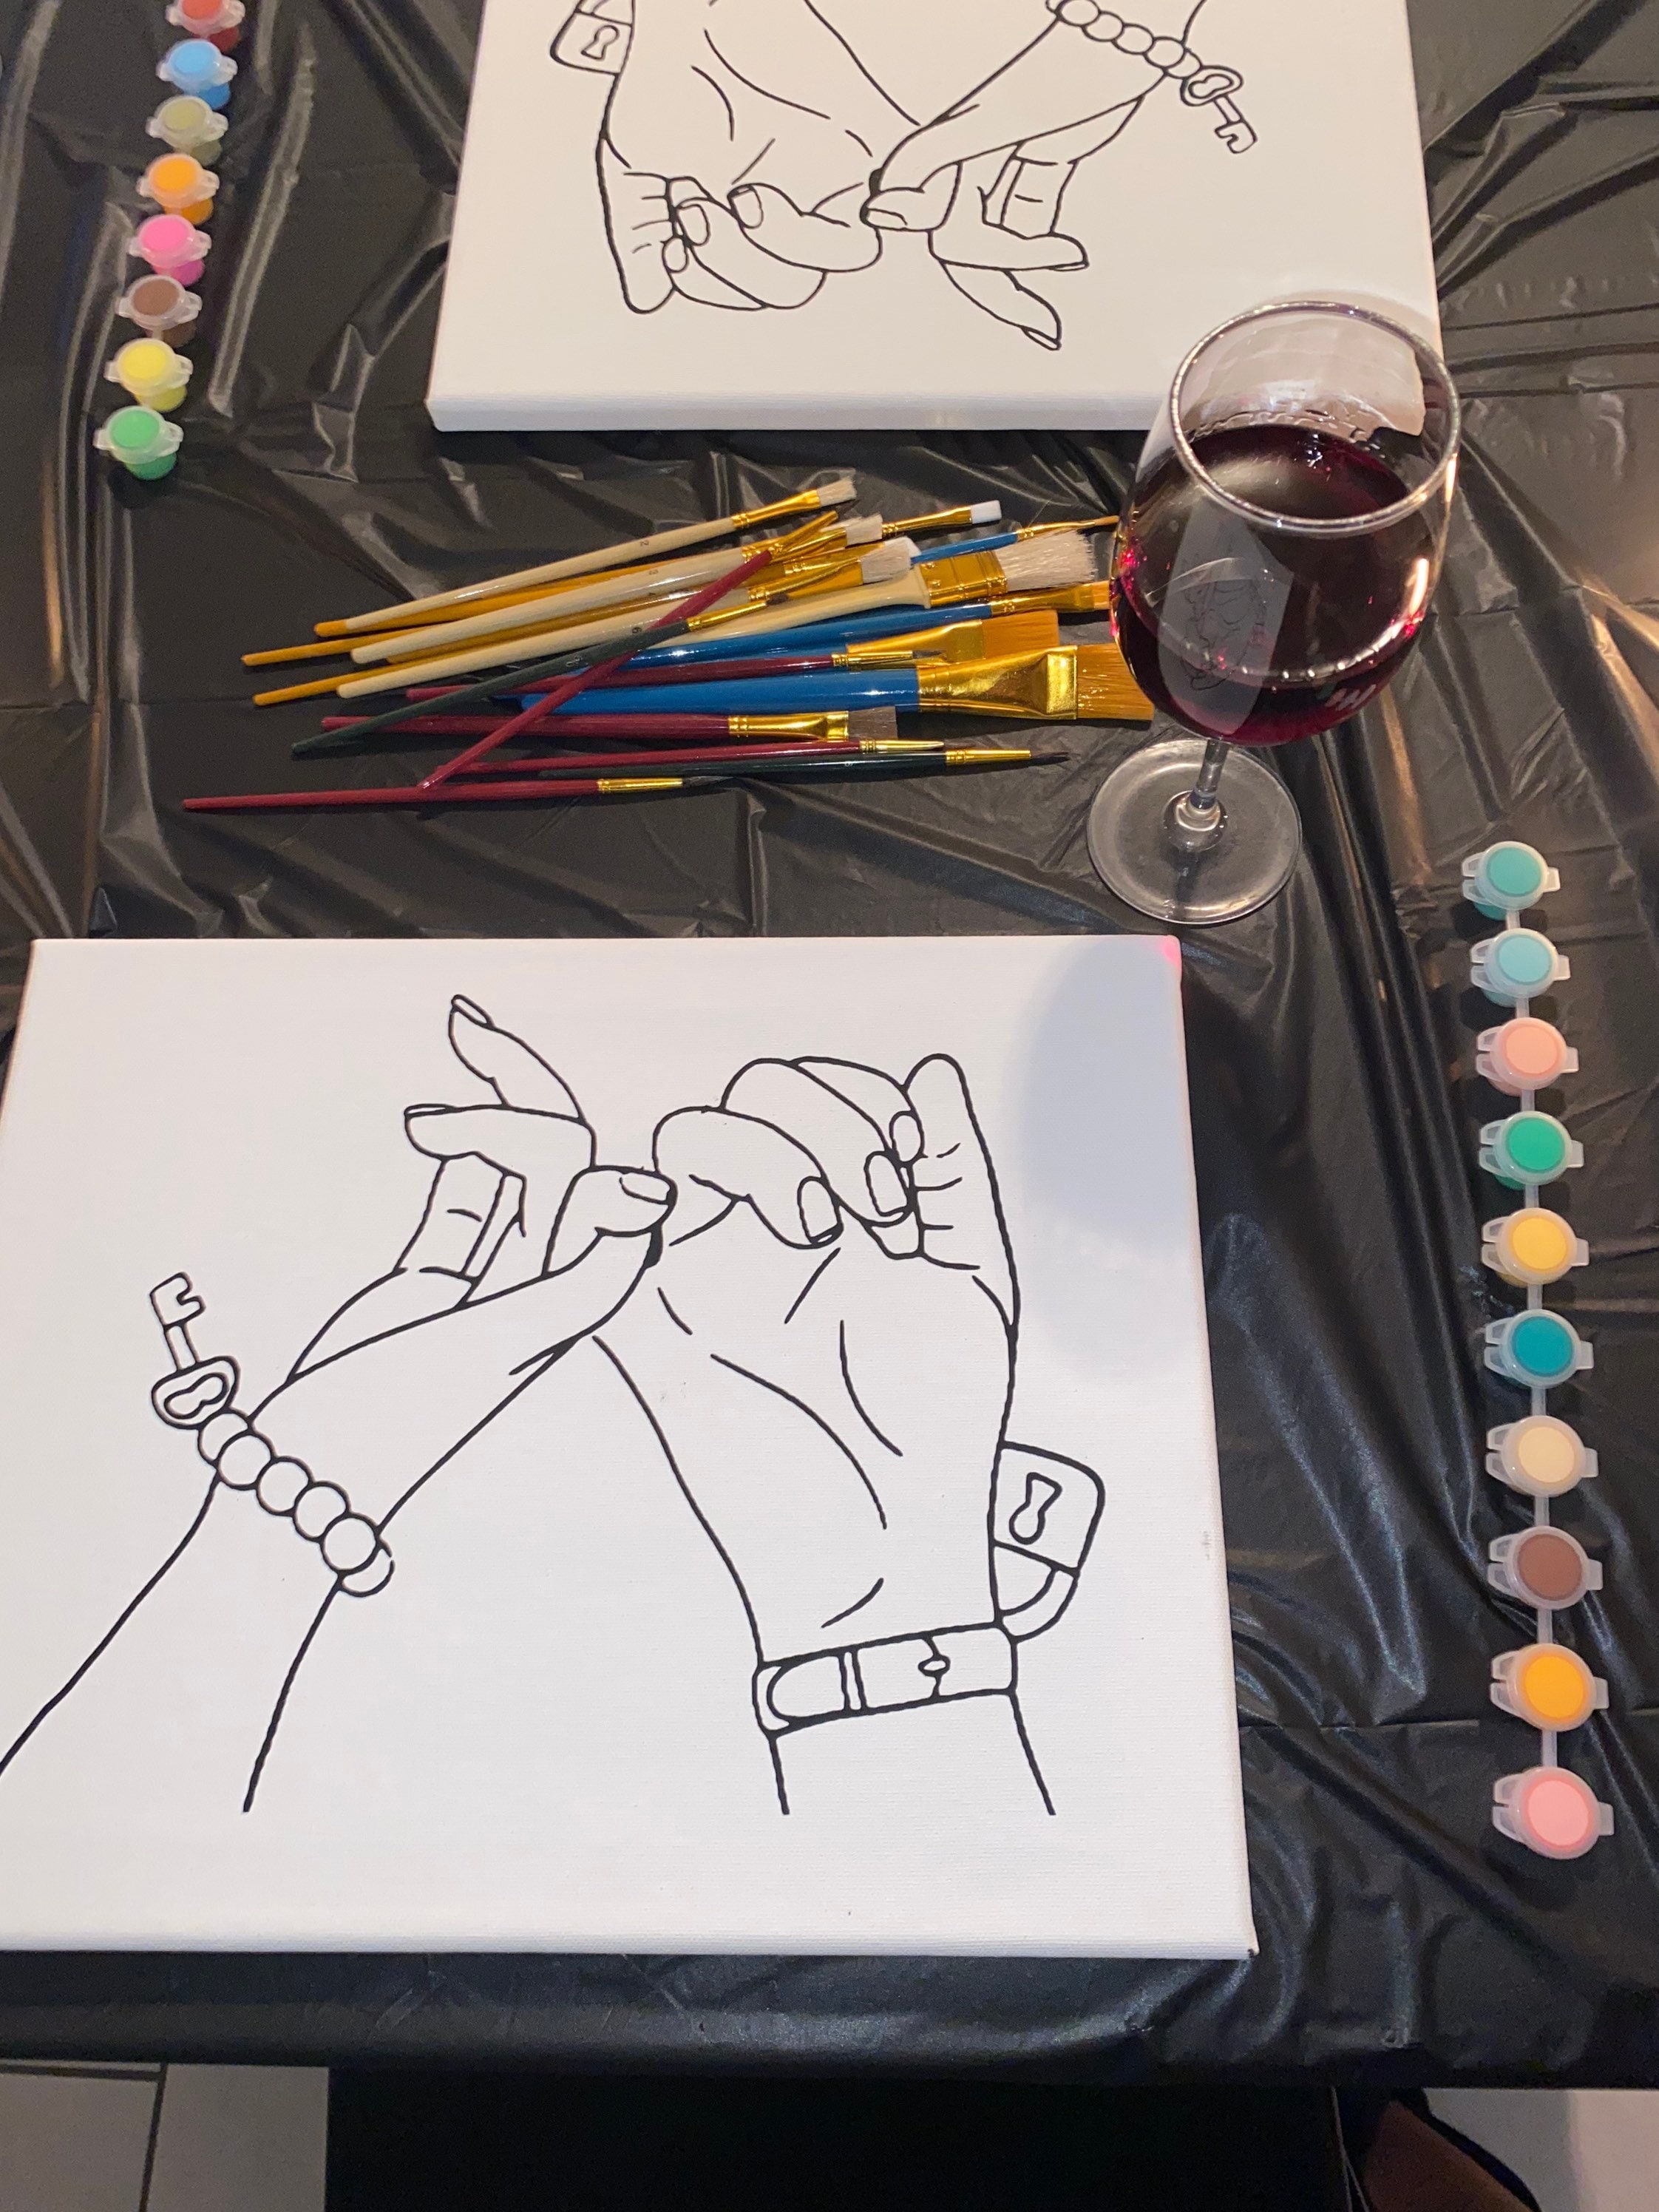 The Fashionista Wine Glass Painting Kit for Paint and Sip Party / Paint  Party Kit / Outlined Paint Party / Wine Glass Paint Kit 